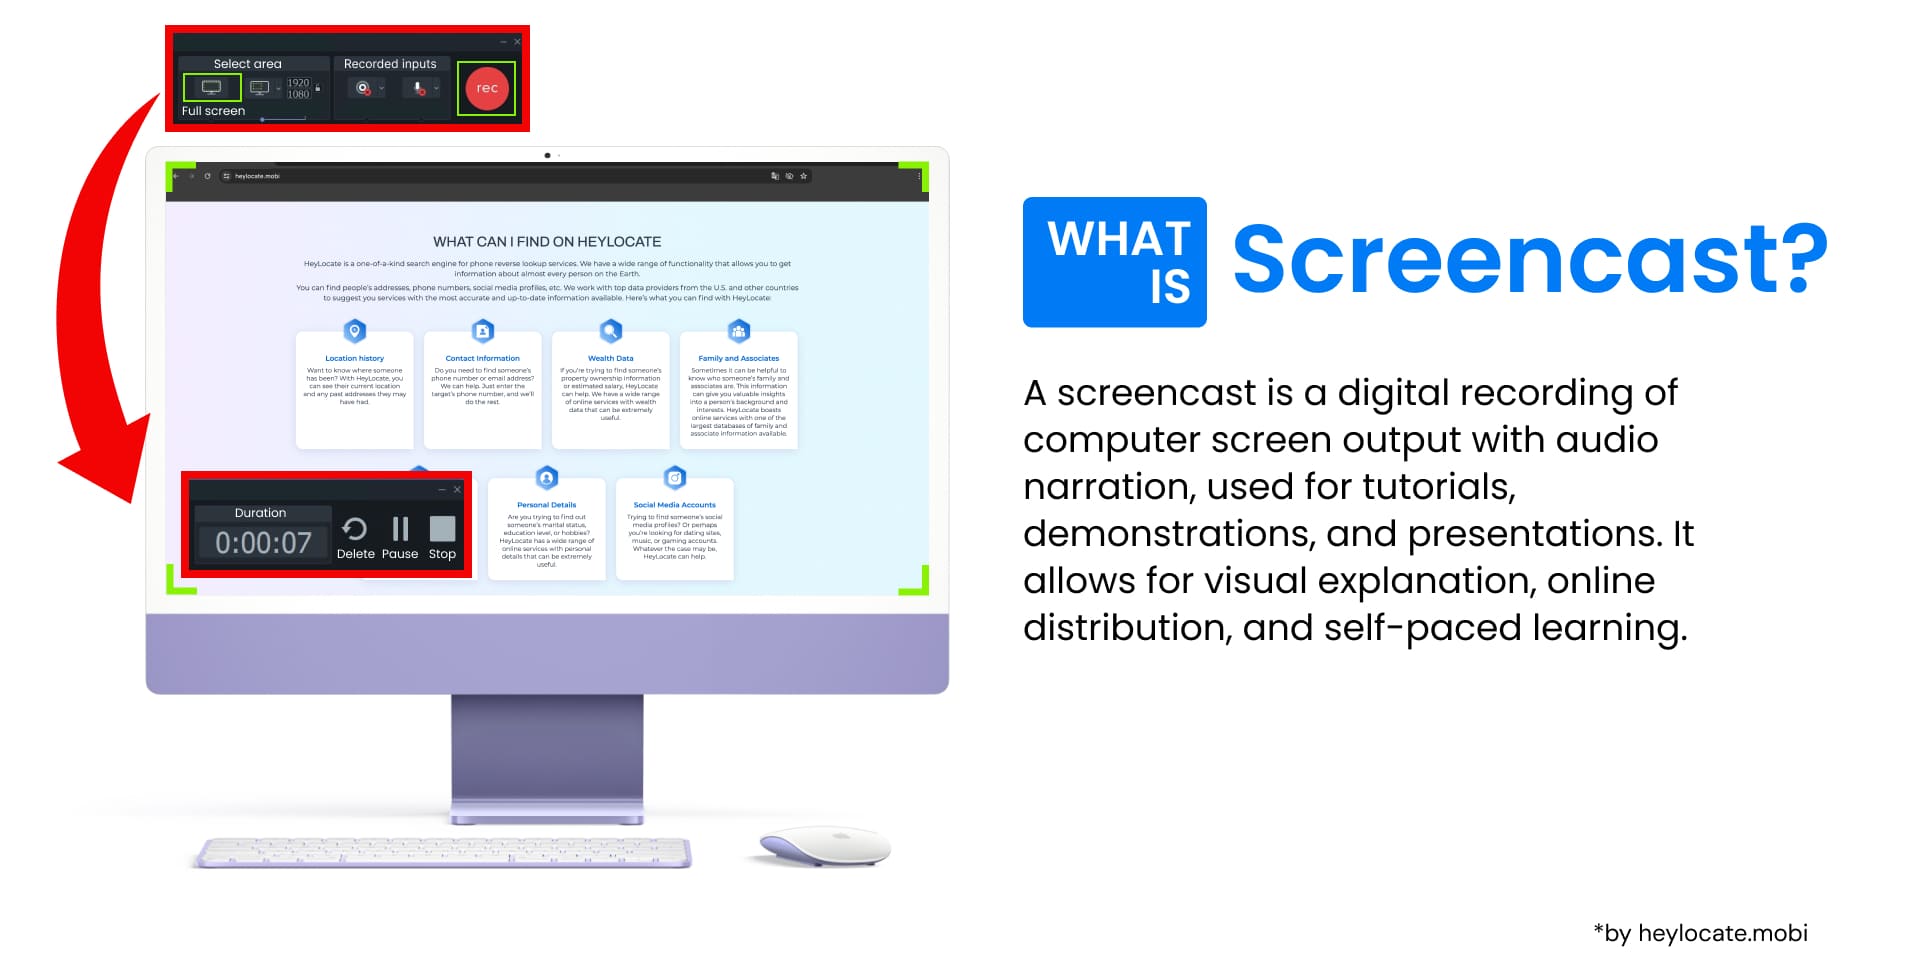 An image showing a computer with a screencasting application interface and the definition of what screencast is.